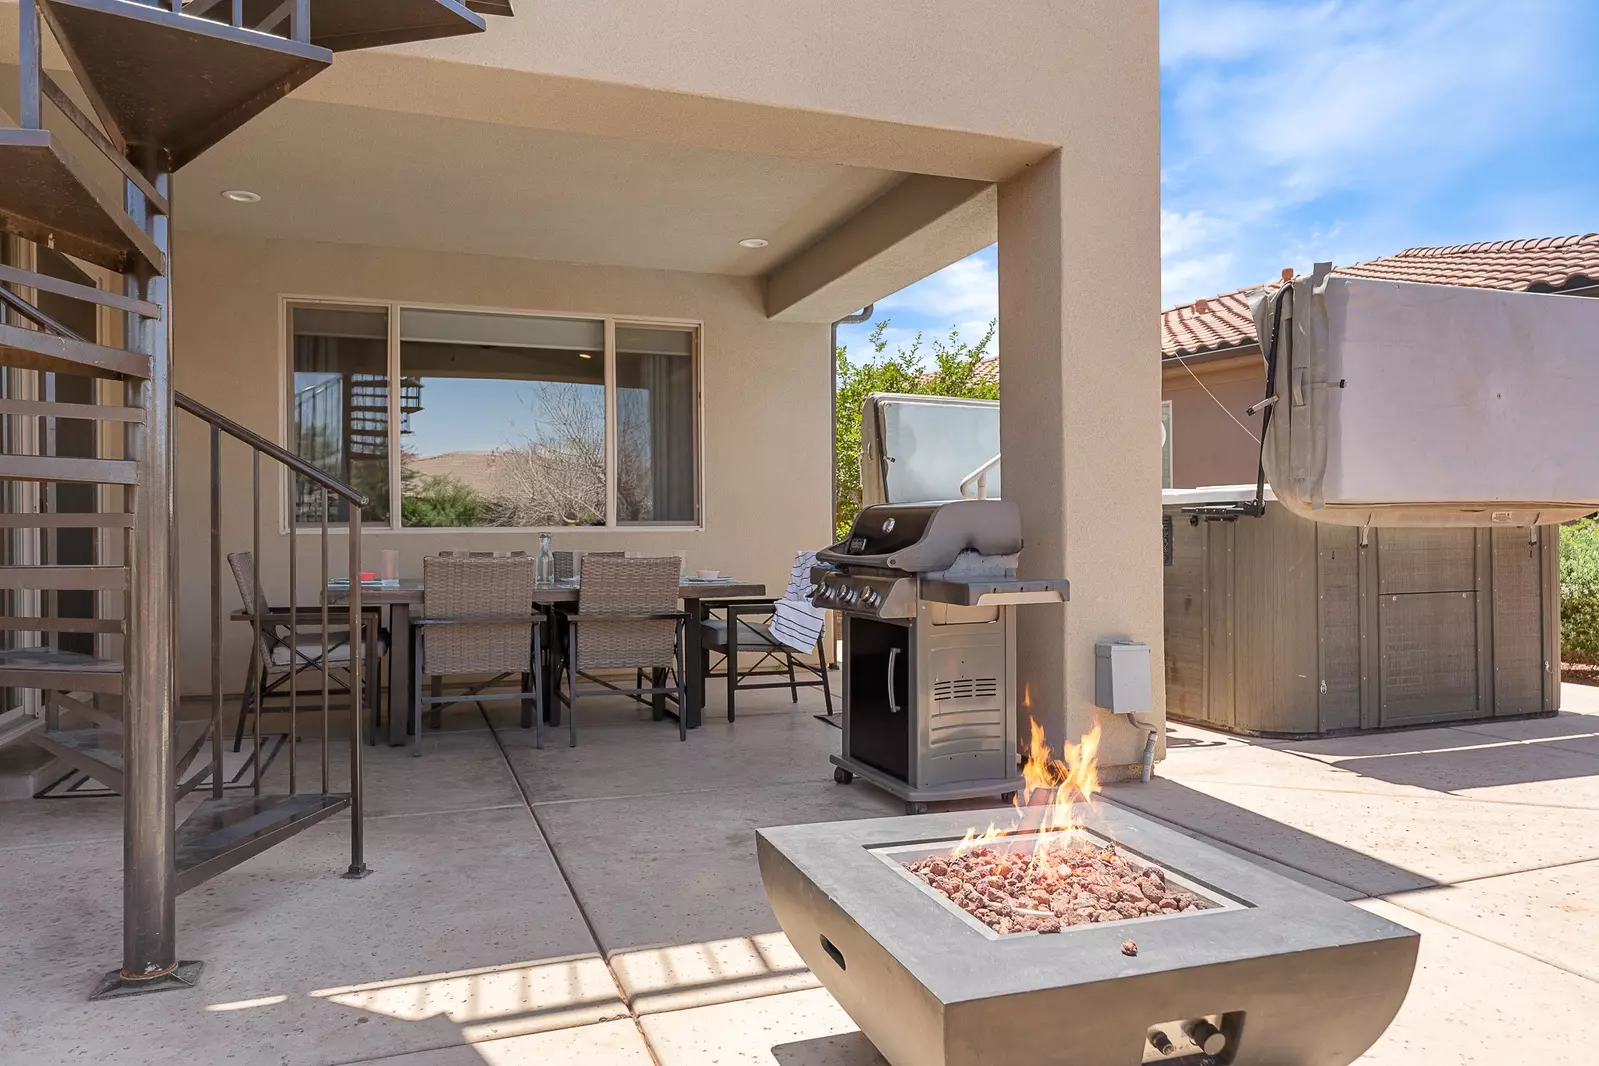 Fire Pit, Grill, Patio, Hot Tub